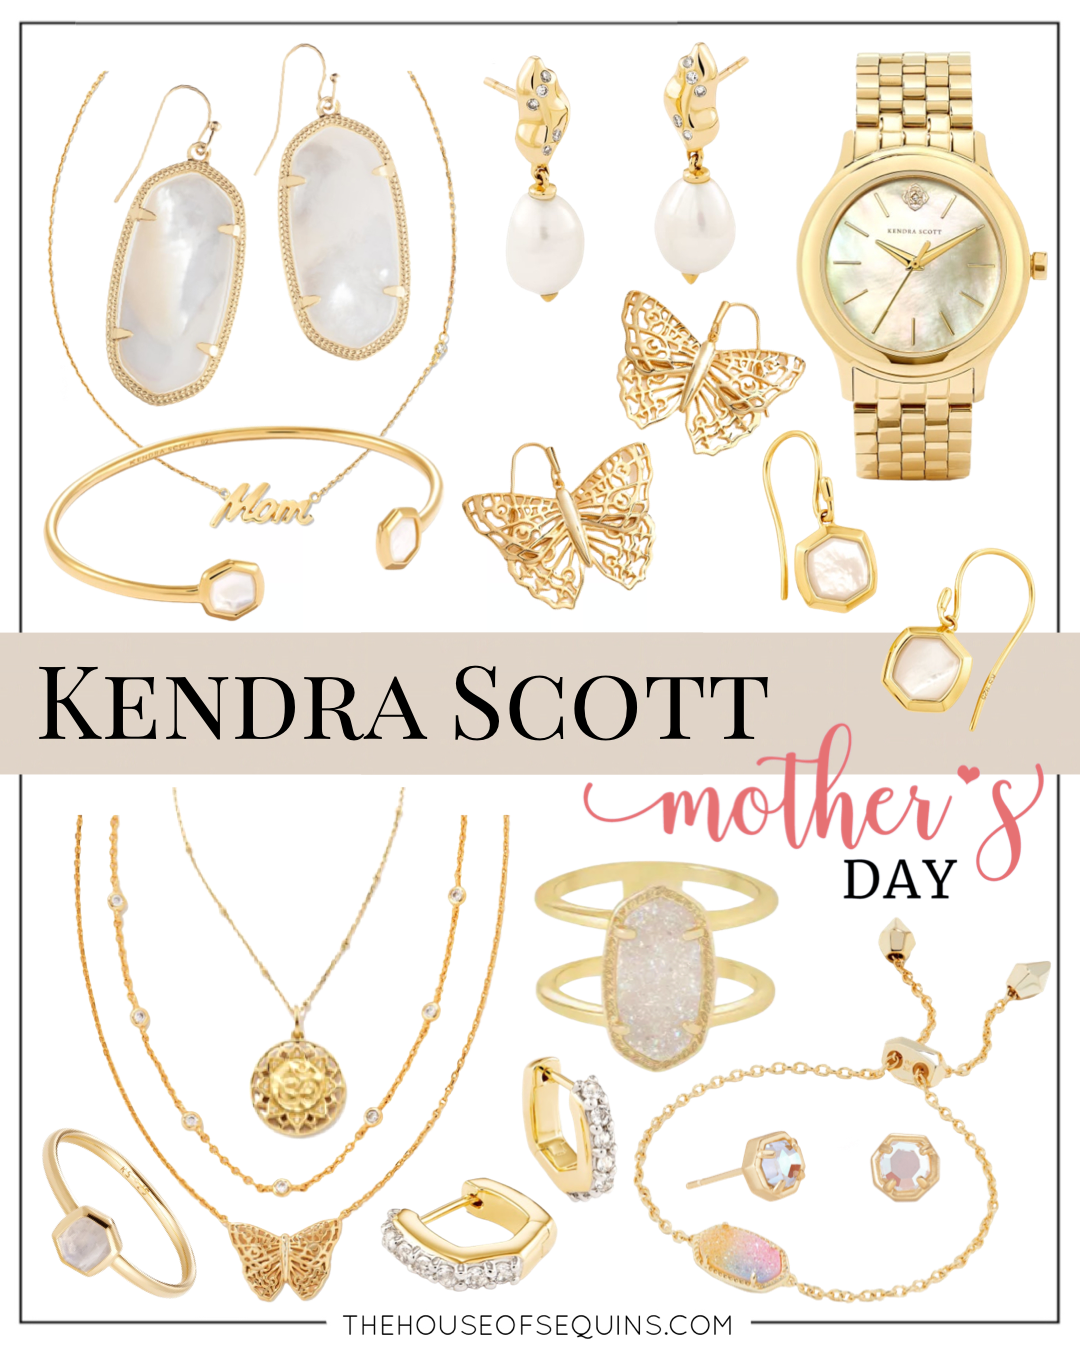 Blogger Sarah Lindner of The House of Sequins sharing new arrivals and Mother's Day Gifts from Kendra Scott.